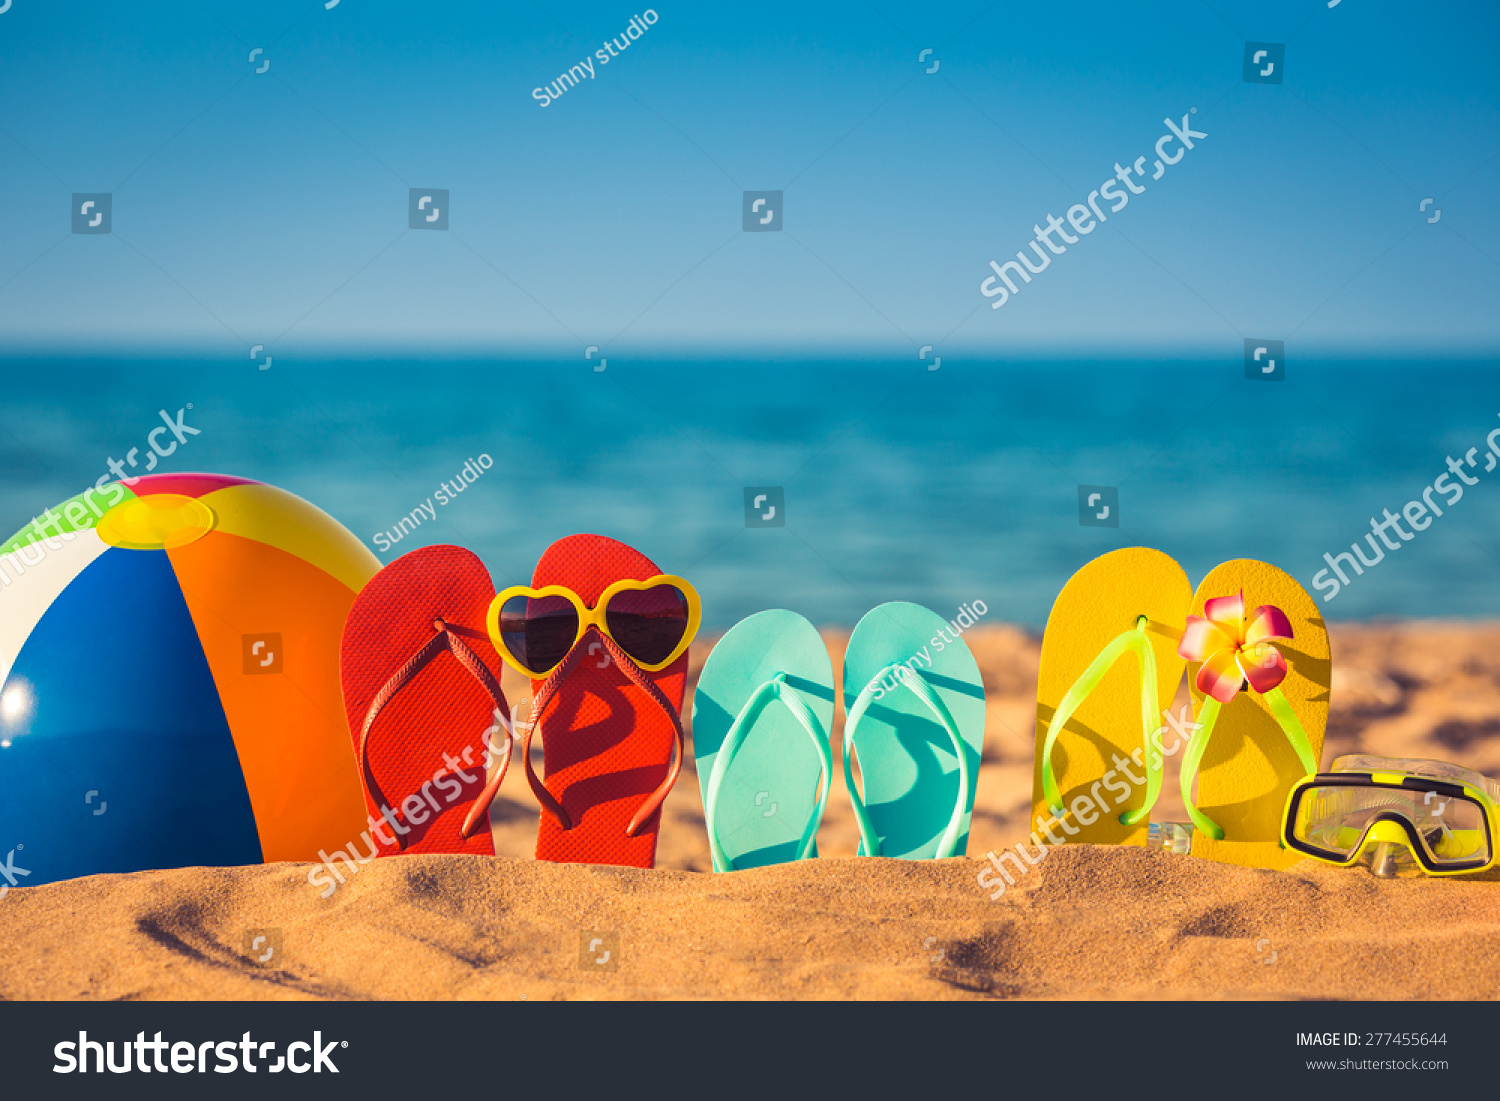 Flip-flops, beach ball and snorkel on the sand. Summer vacation concept #277455644